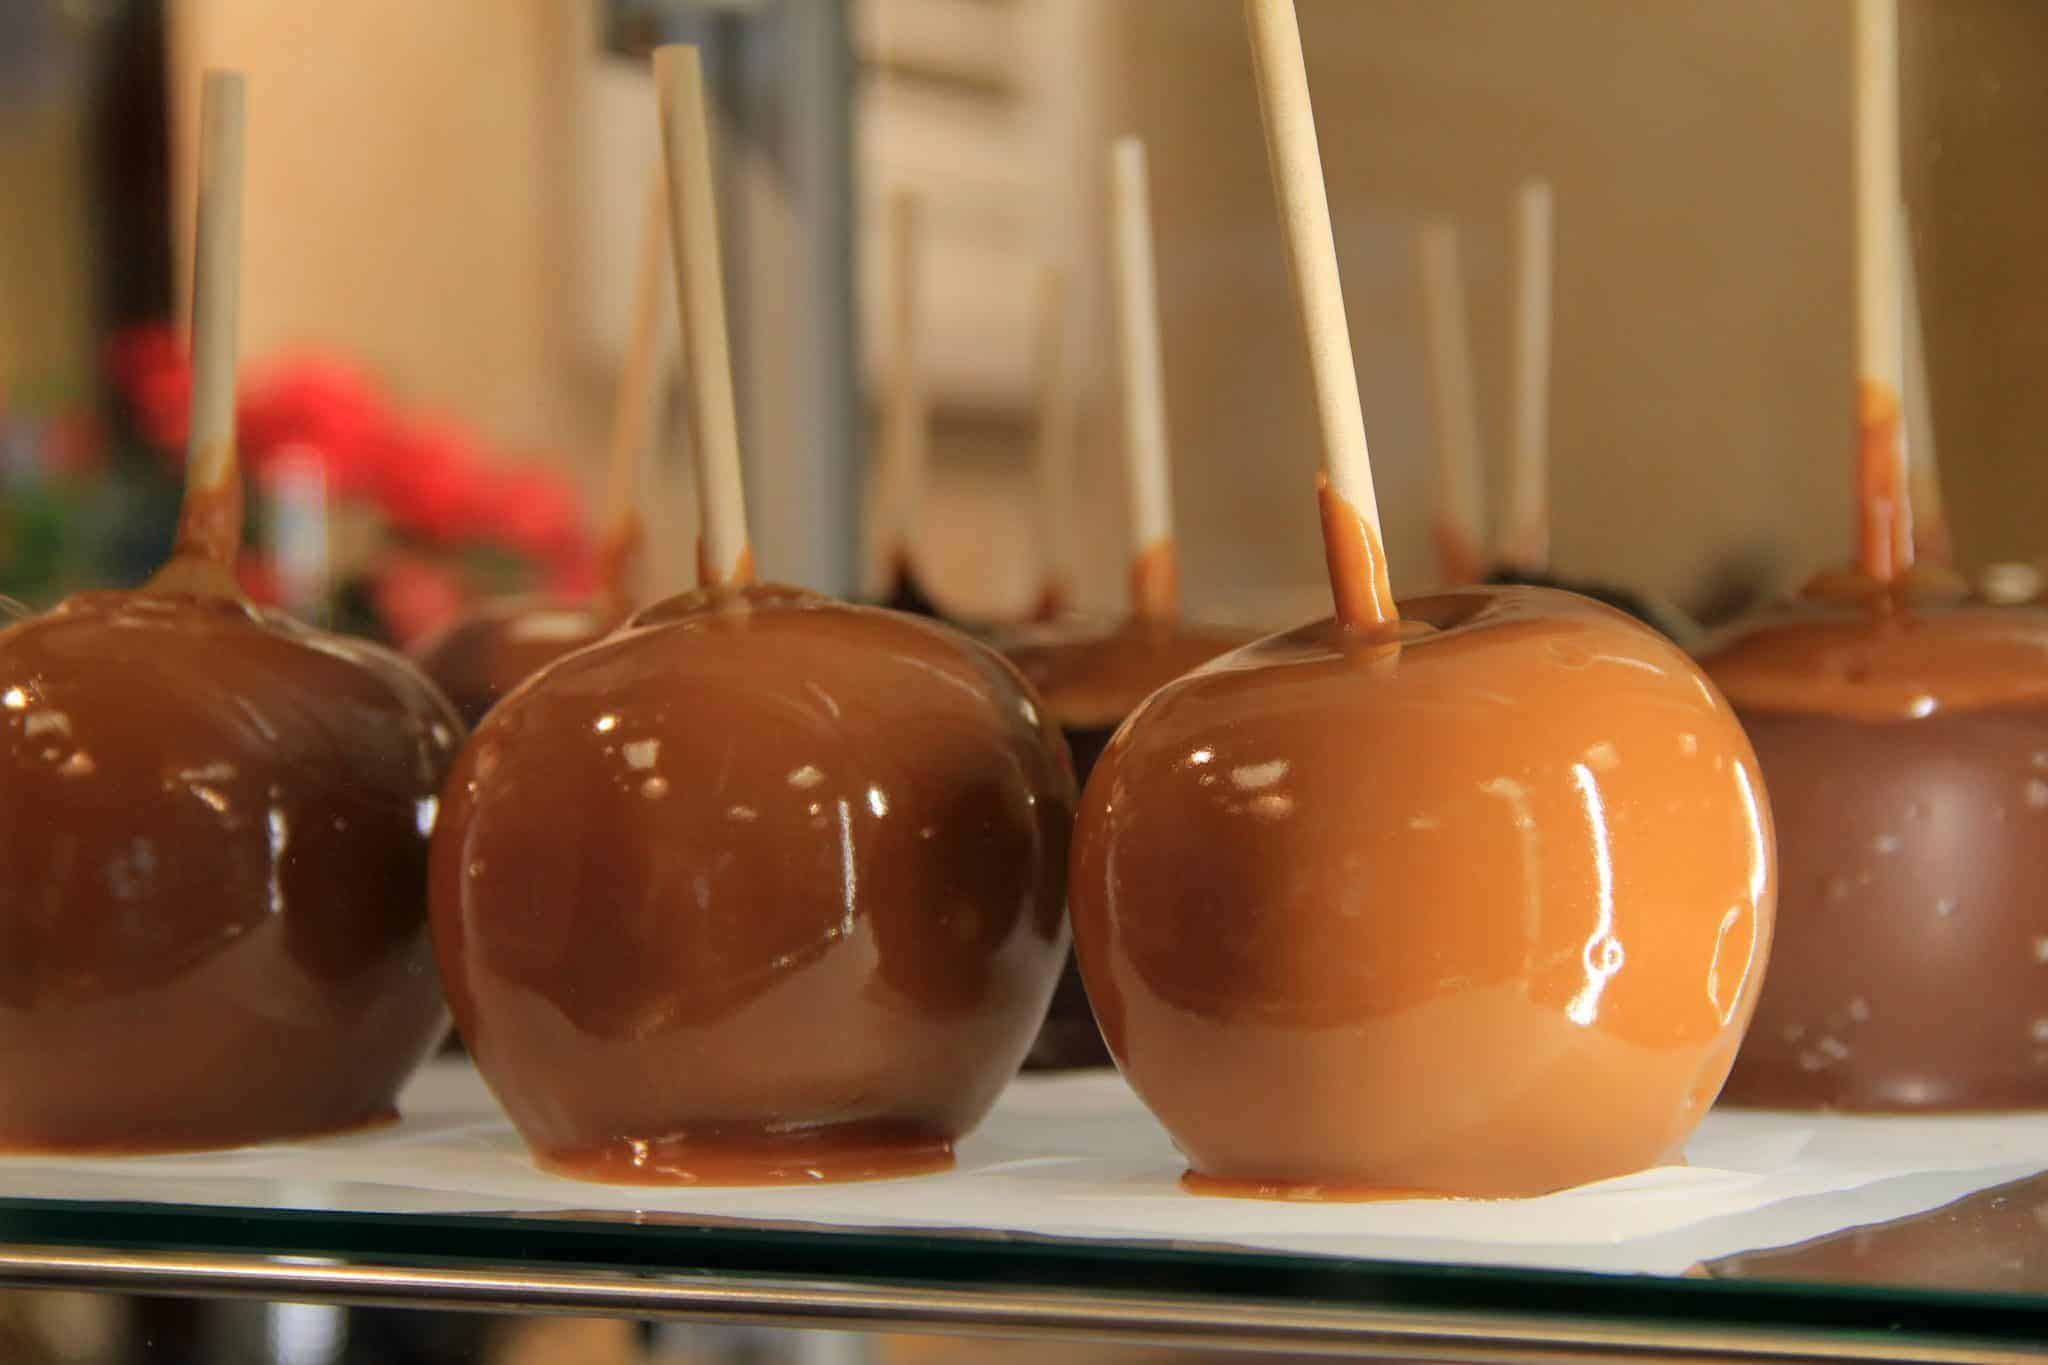 Classic caramel apples recipe with 20+ ideas to roll them in. Perfect for a fall dessert idea or a Halloween treat! #caramelapples www.savoryexperiments.com